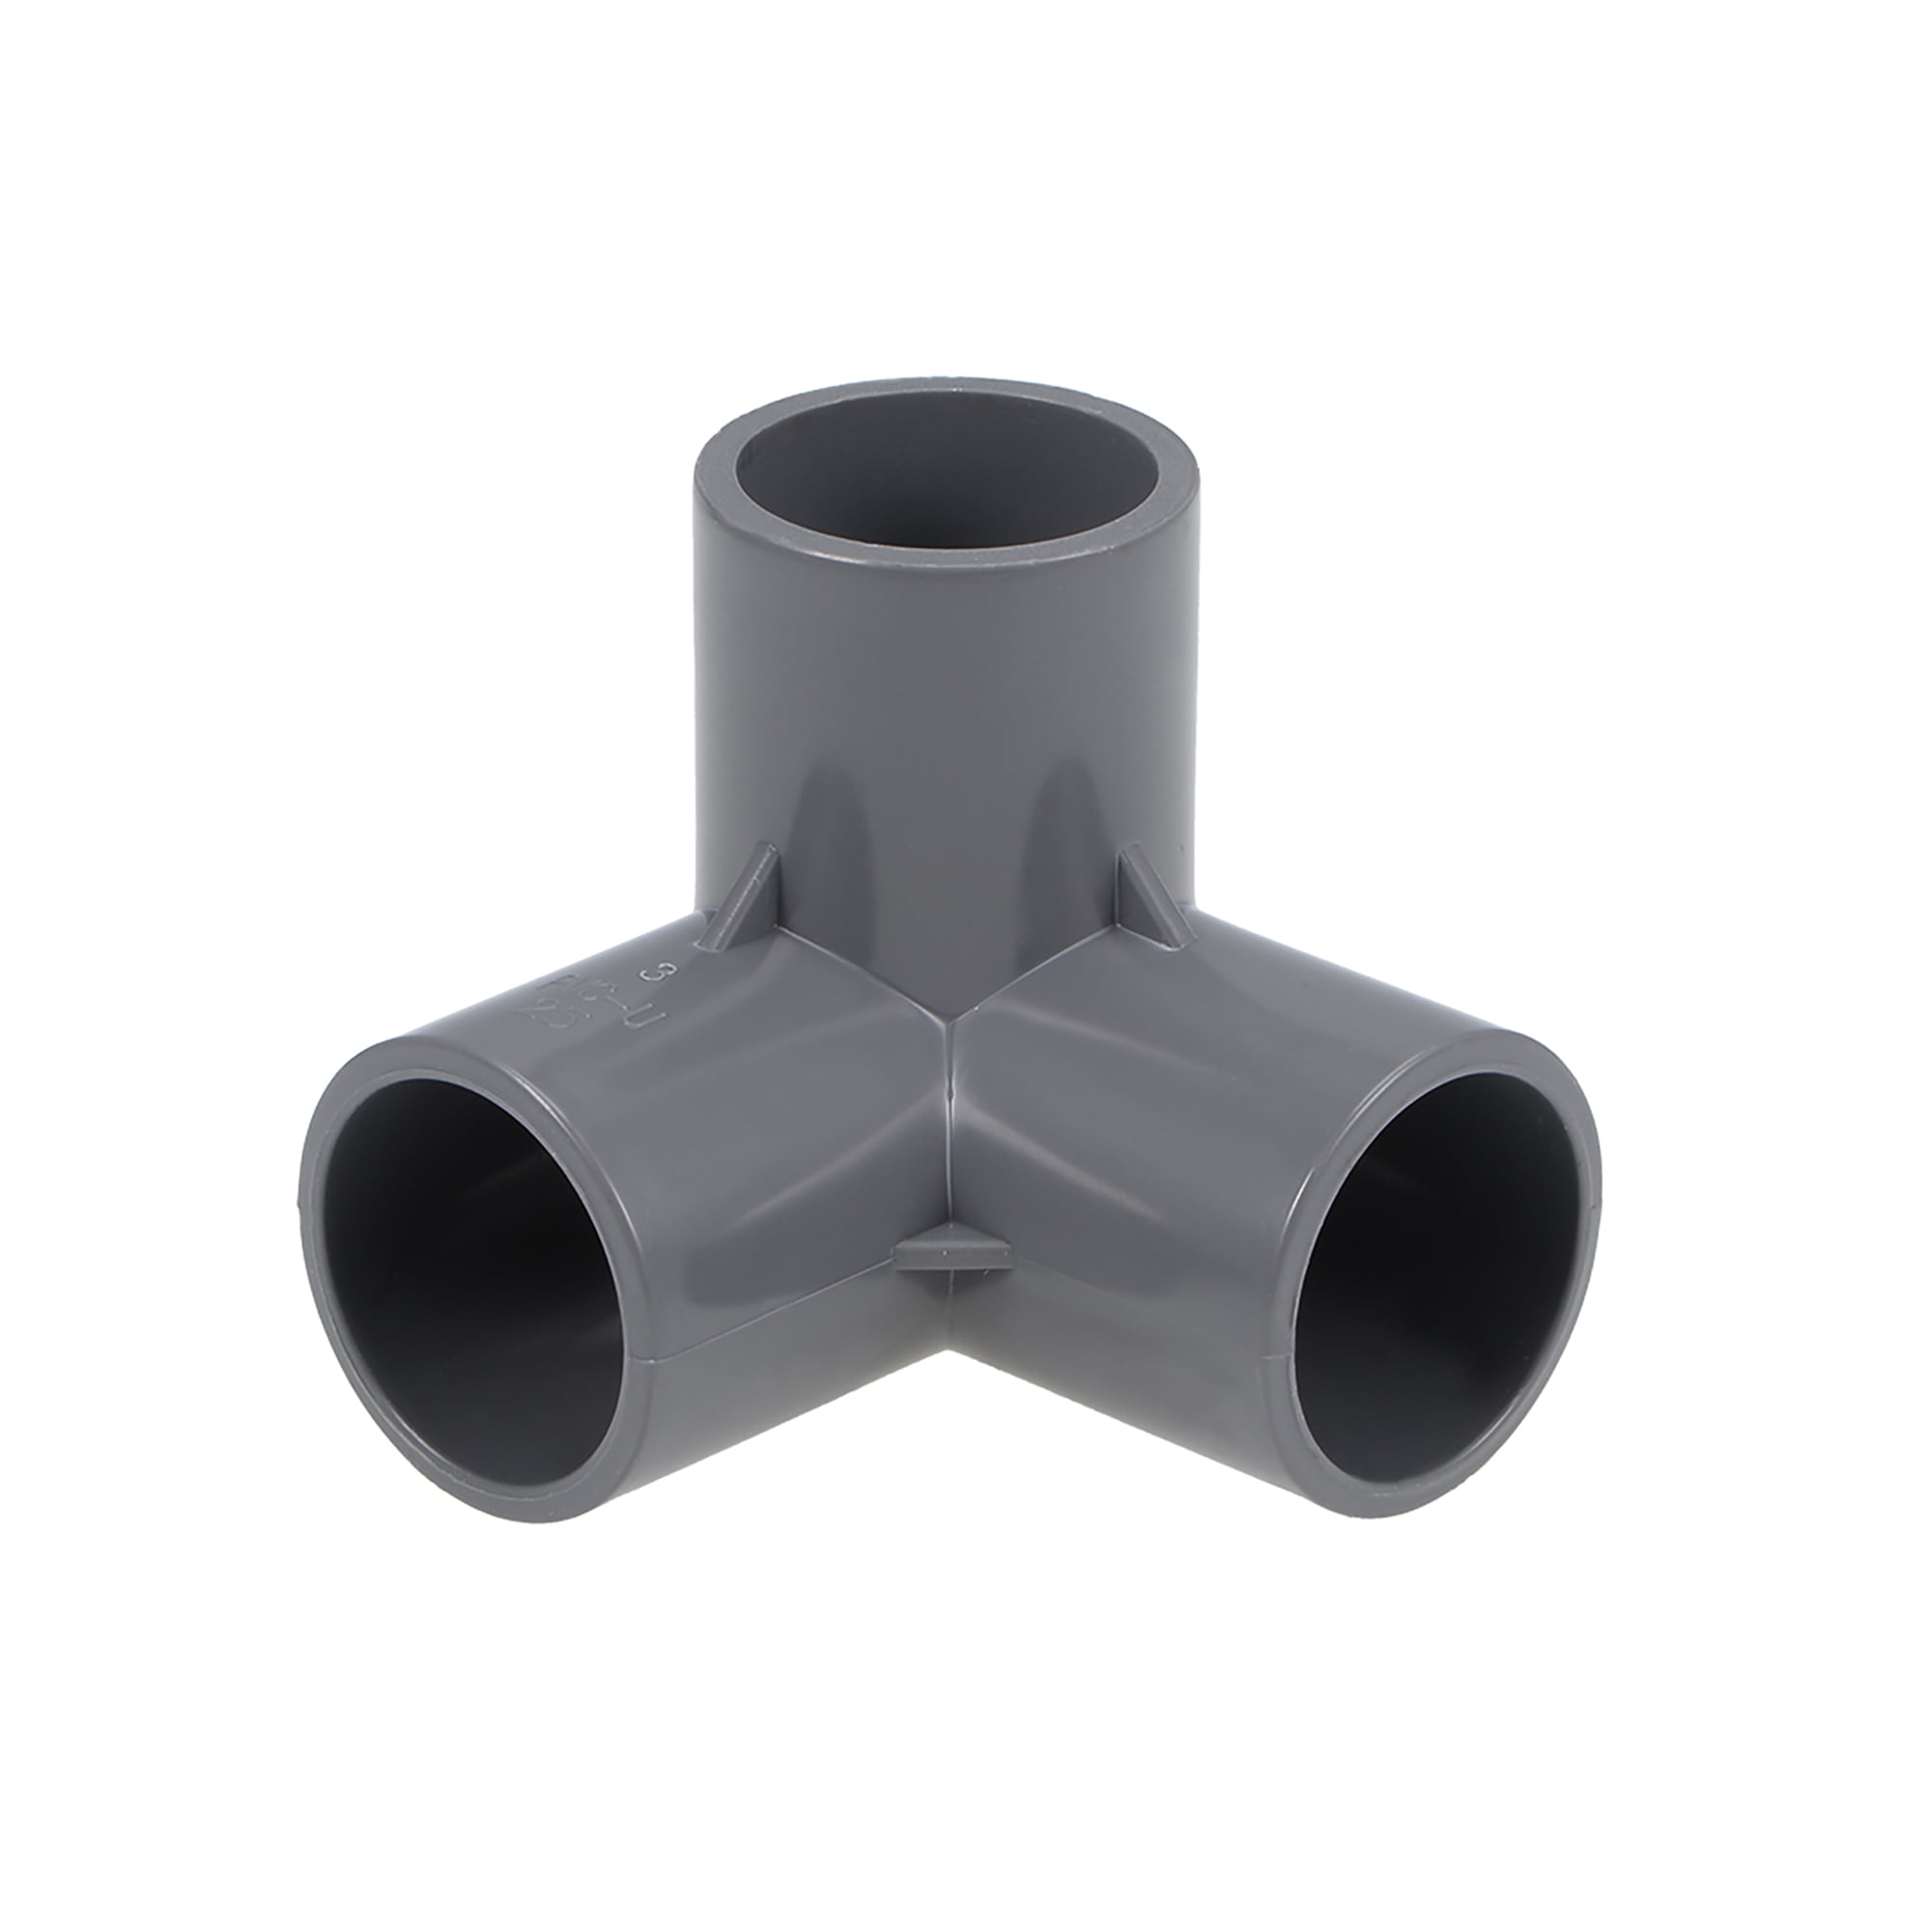 3 Way Elbow PVC Pipe Fitting Furniture Grade 3 4 inch Size Tee Corner 